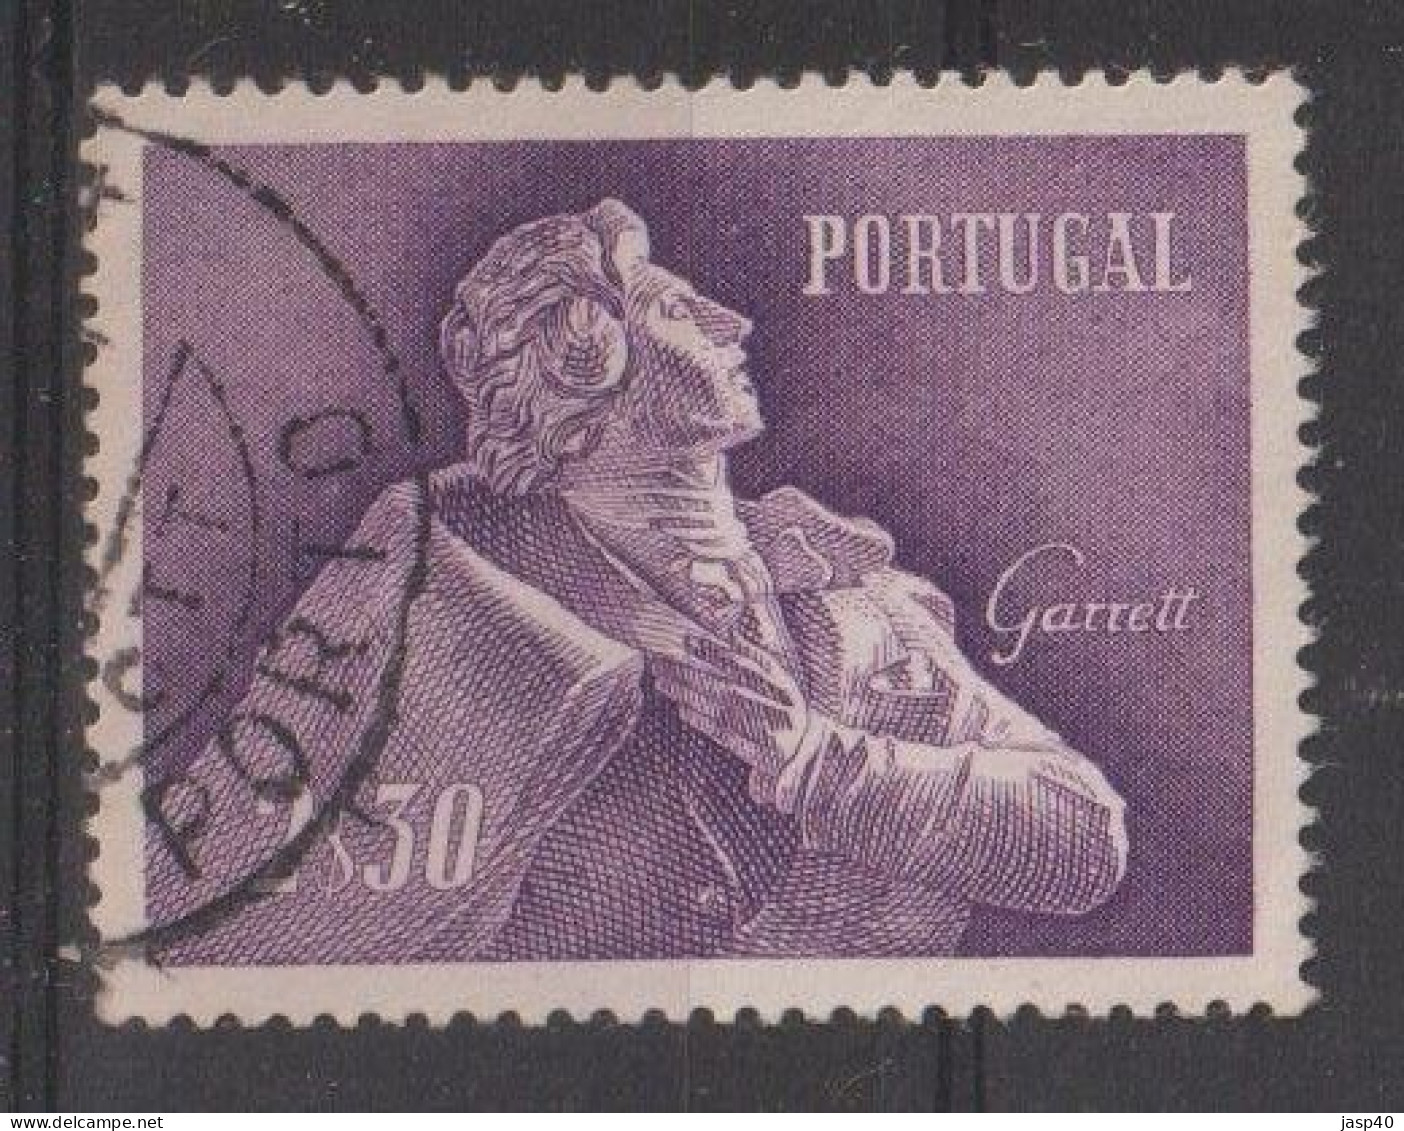 PORTUGAL 828 - POSTMARKS OF PORTUGAL - PORTO - Used Stamps